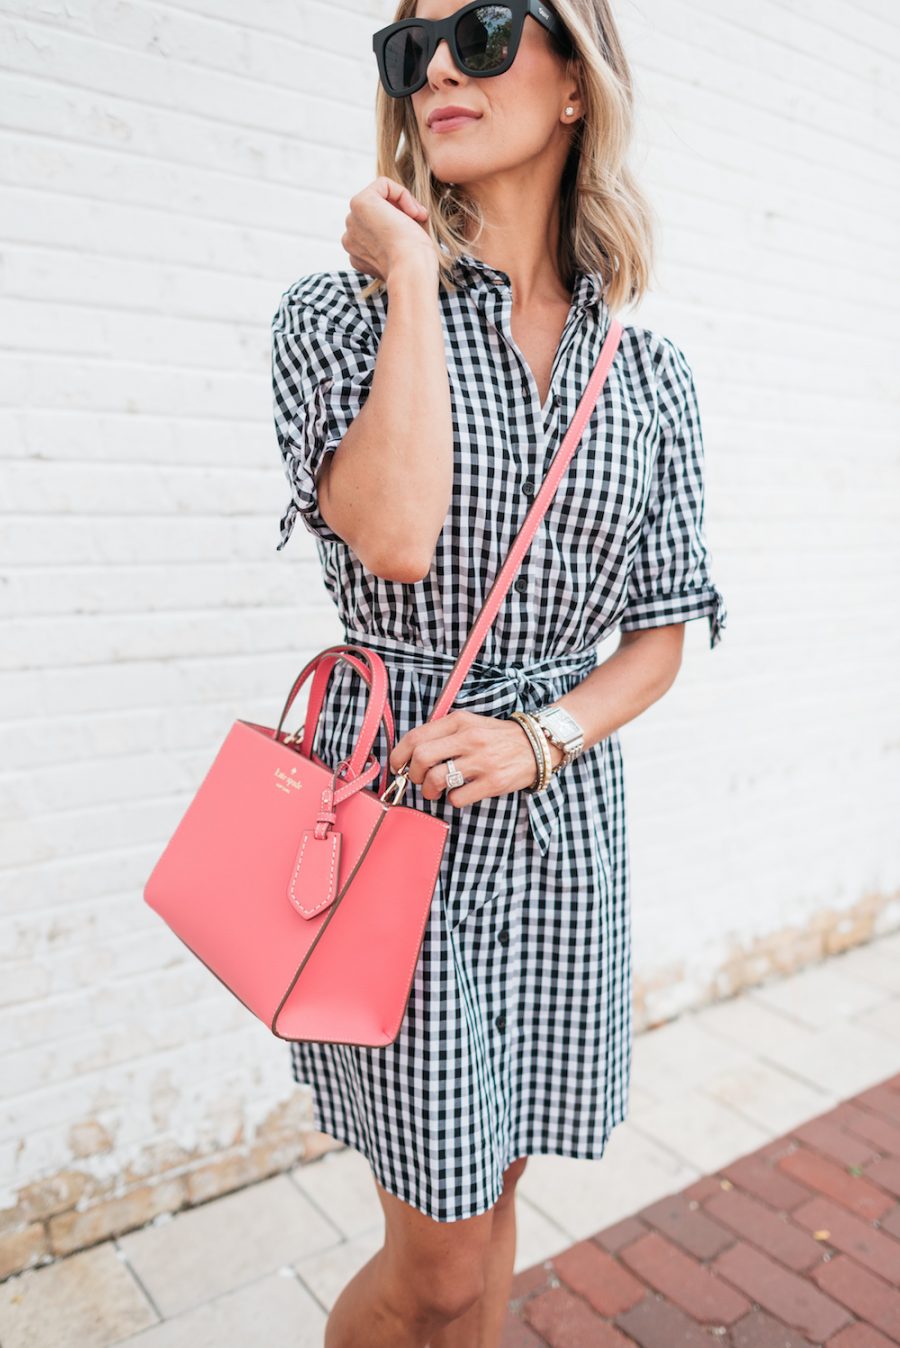 It's My Birthday! (And I'm Giving Away This Kate Spade Handbag) - my kind  of sweet